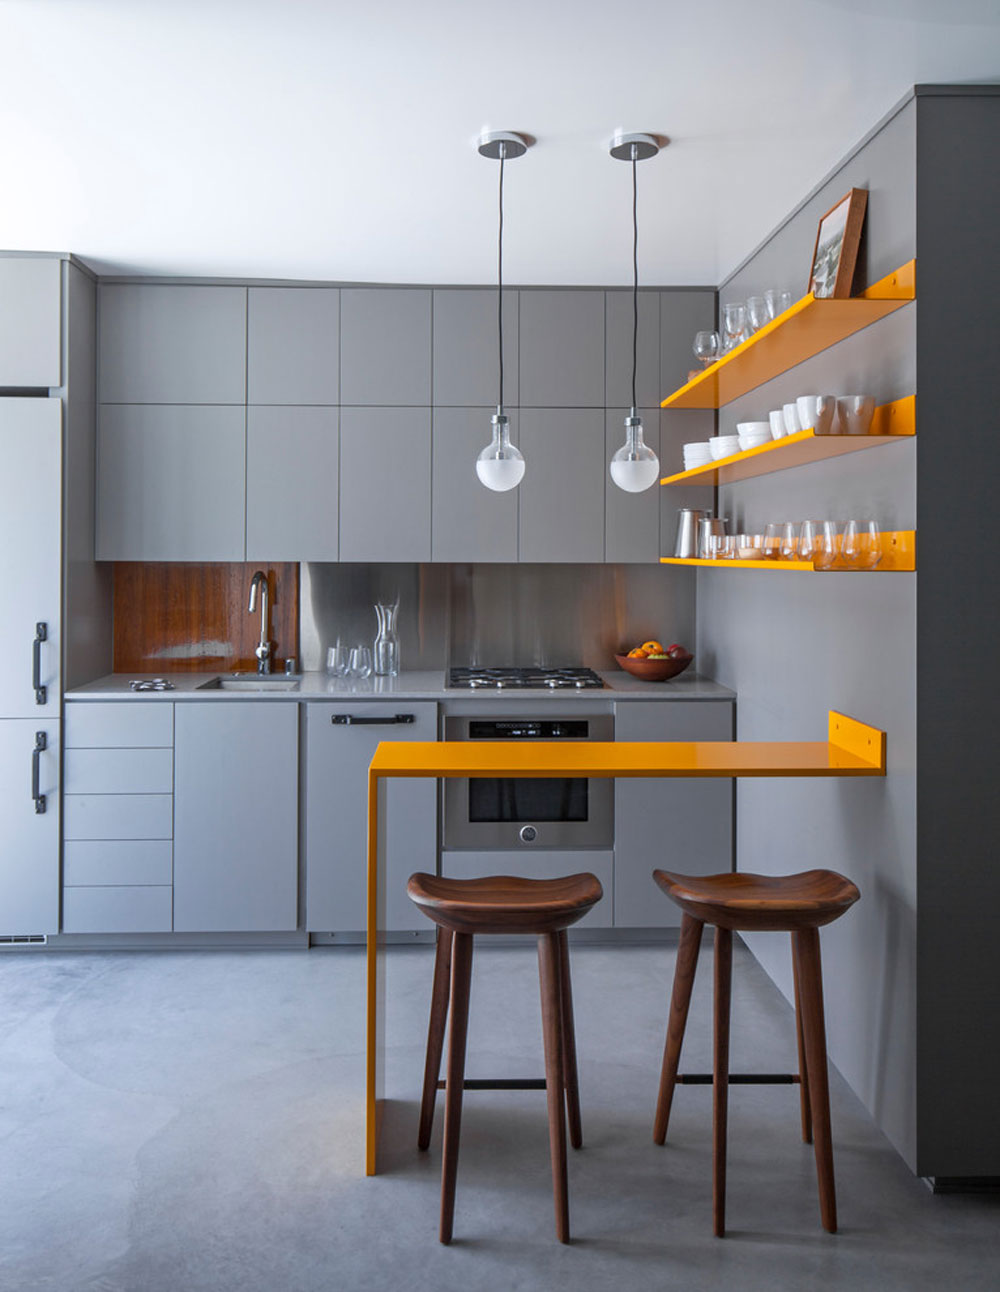 Venice-Micro-Apartment-by-Vertebrae-Architecture How to organize and decorate a small apartment kitchen